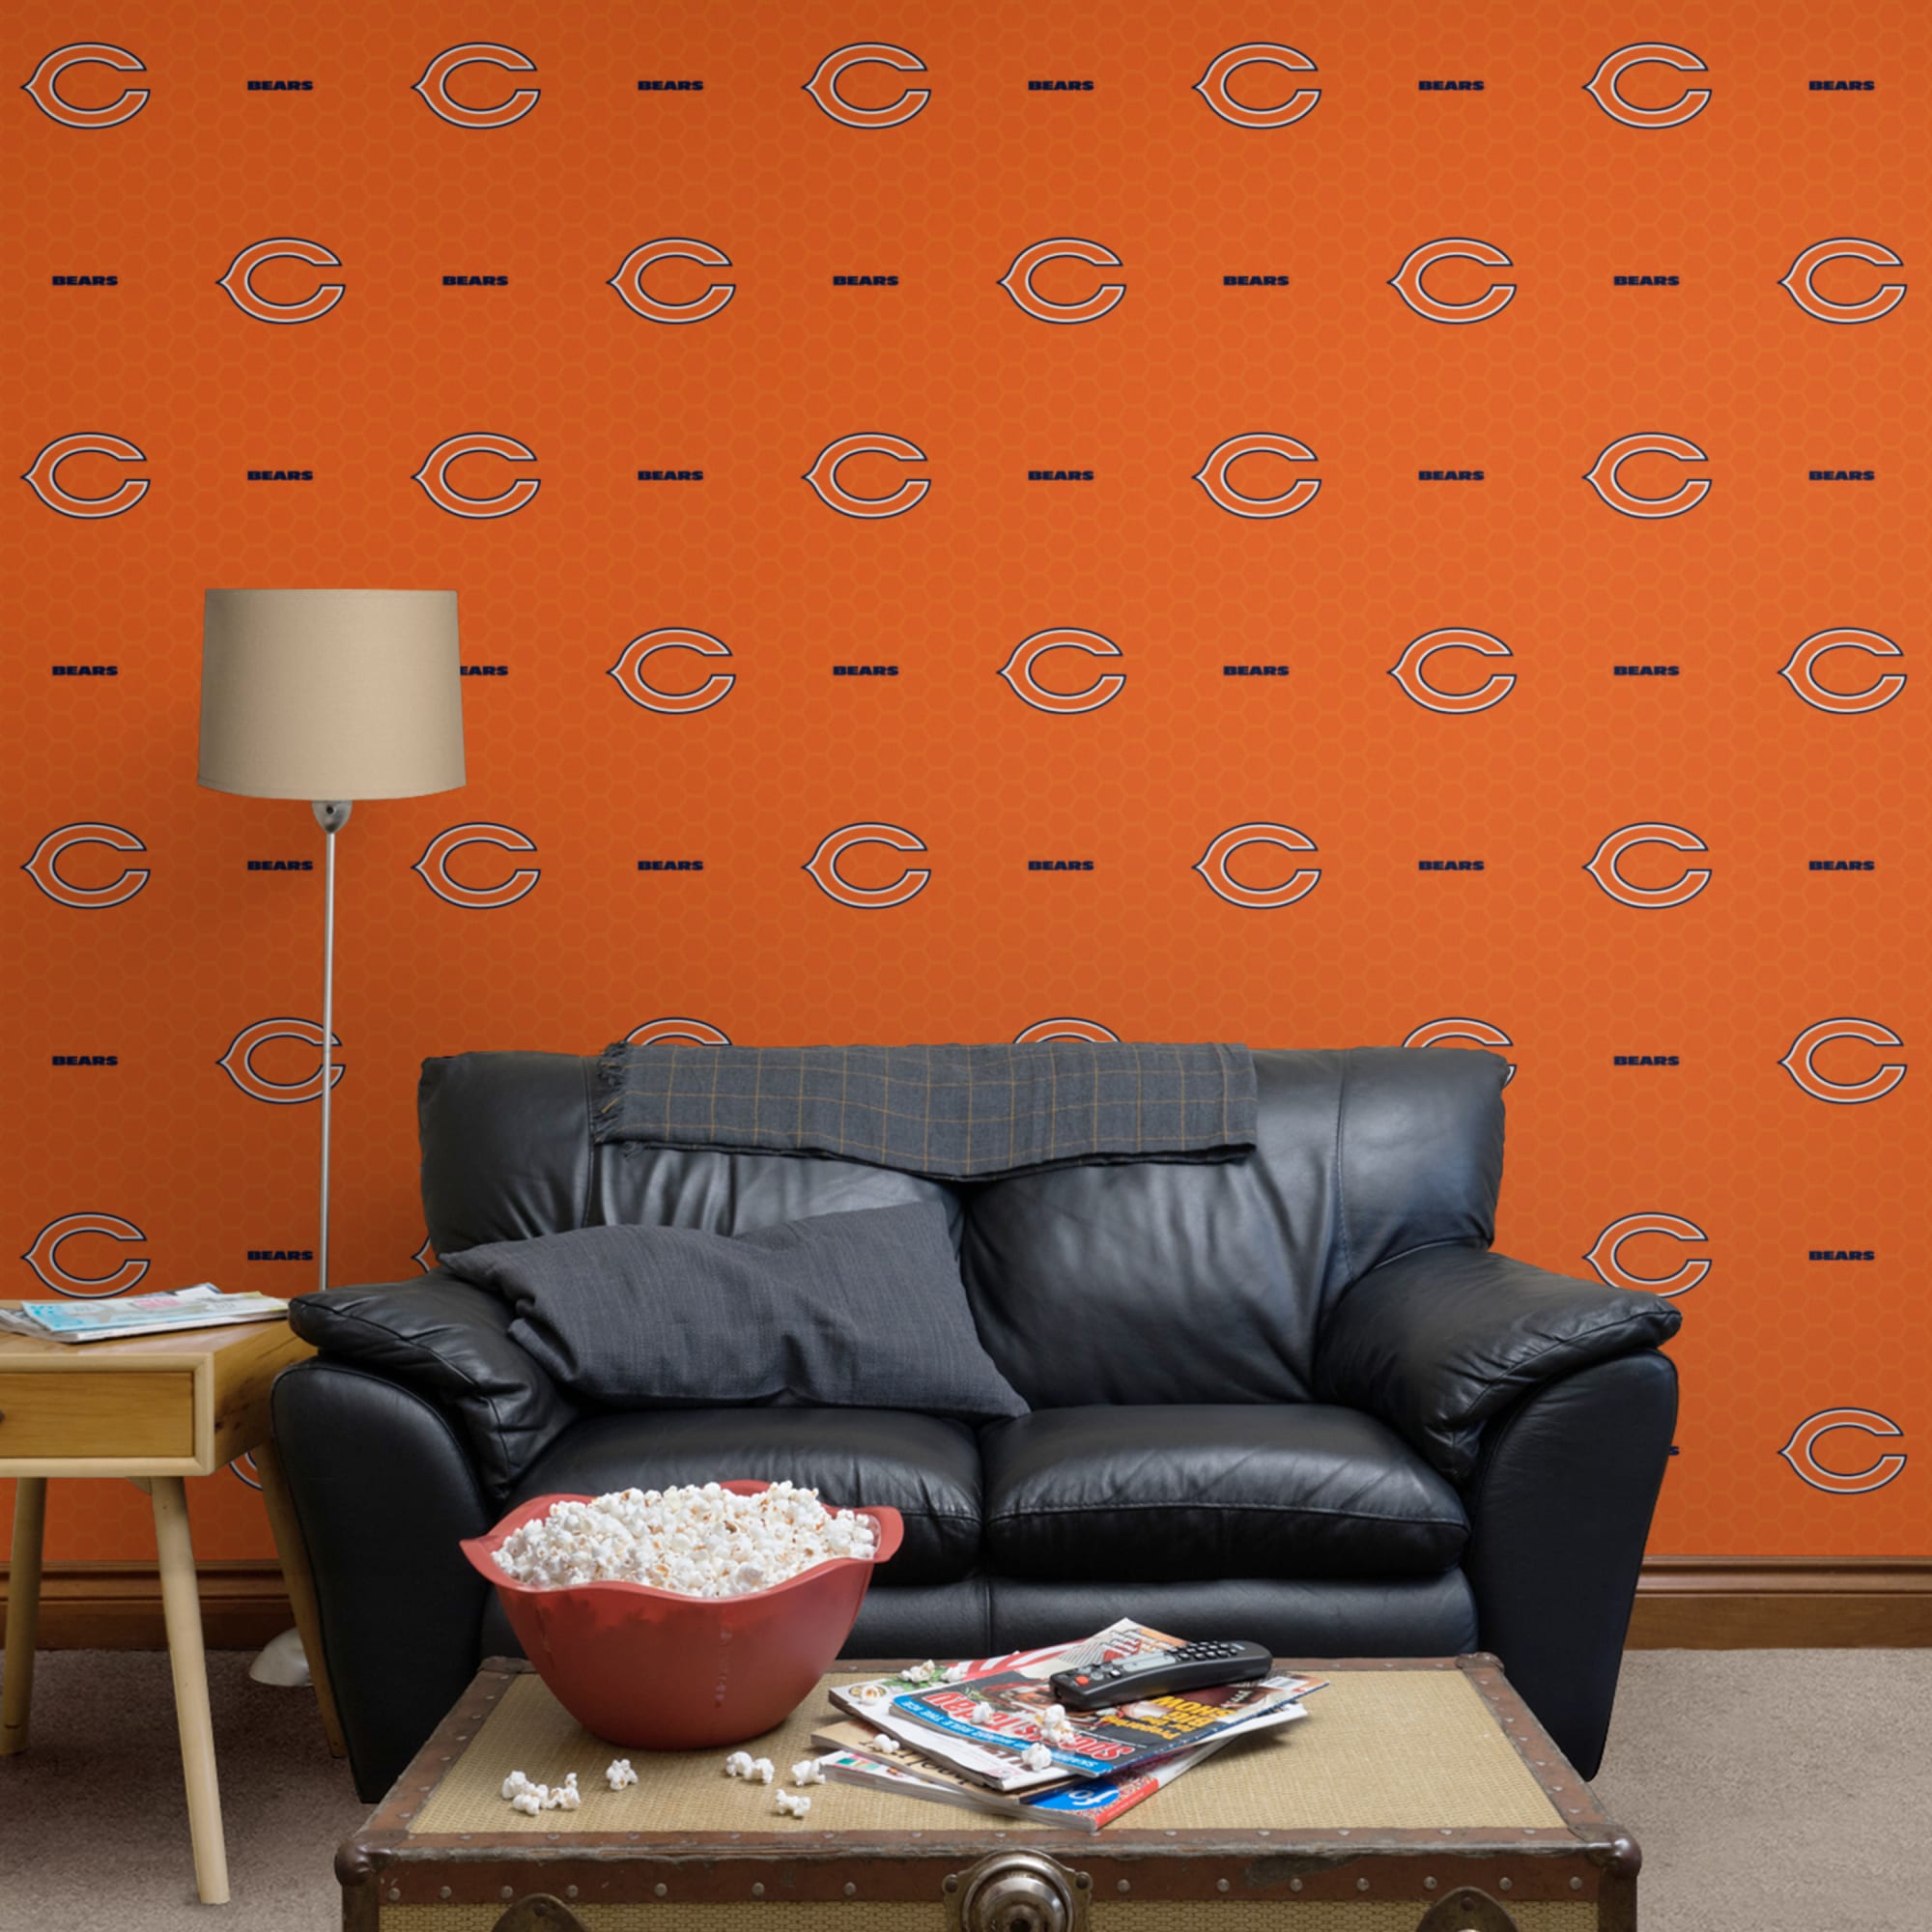 Chicago Bears: Logo Pattern - Officially Licensed NFL Removable Wallpaper 12" x 12" Sample by Fathead